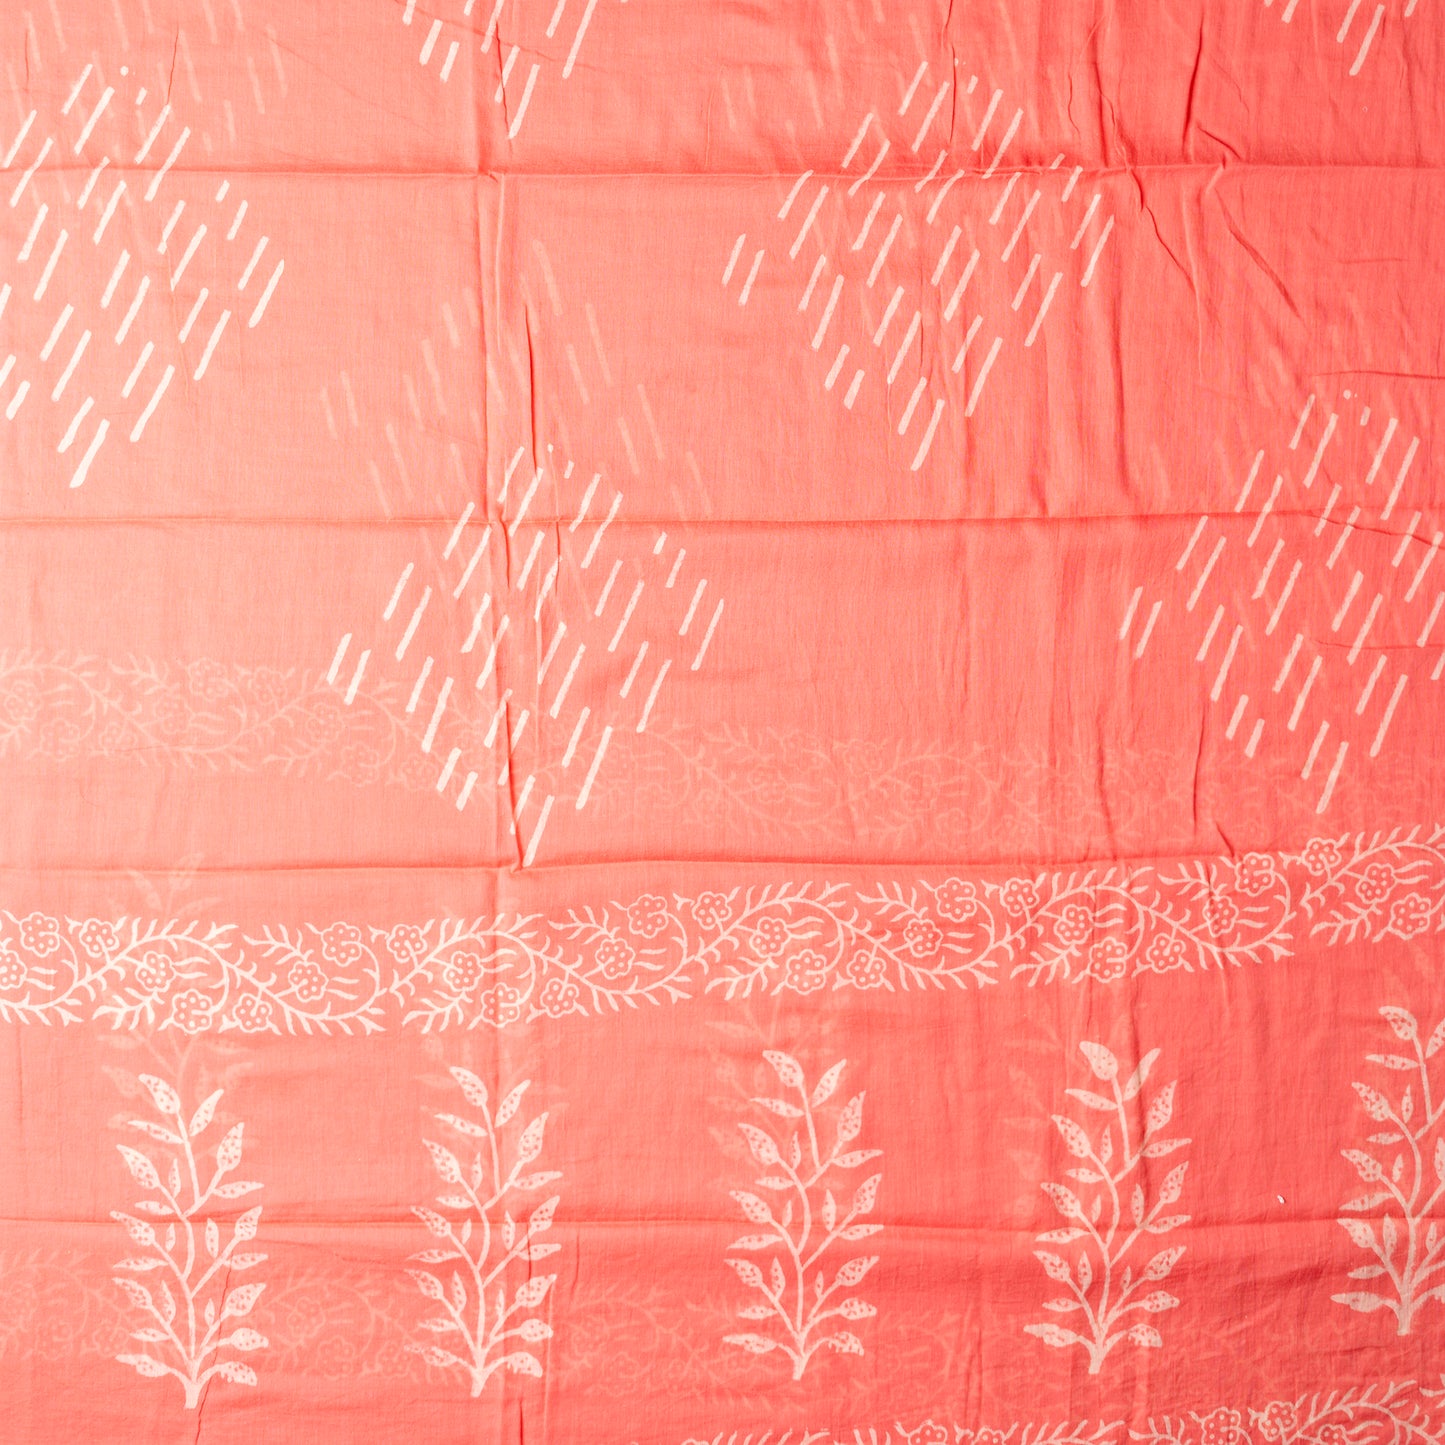 Mul cotton dupatta in peach color with matching print design.